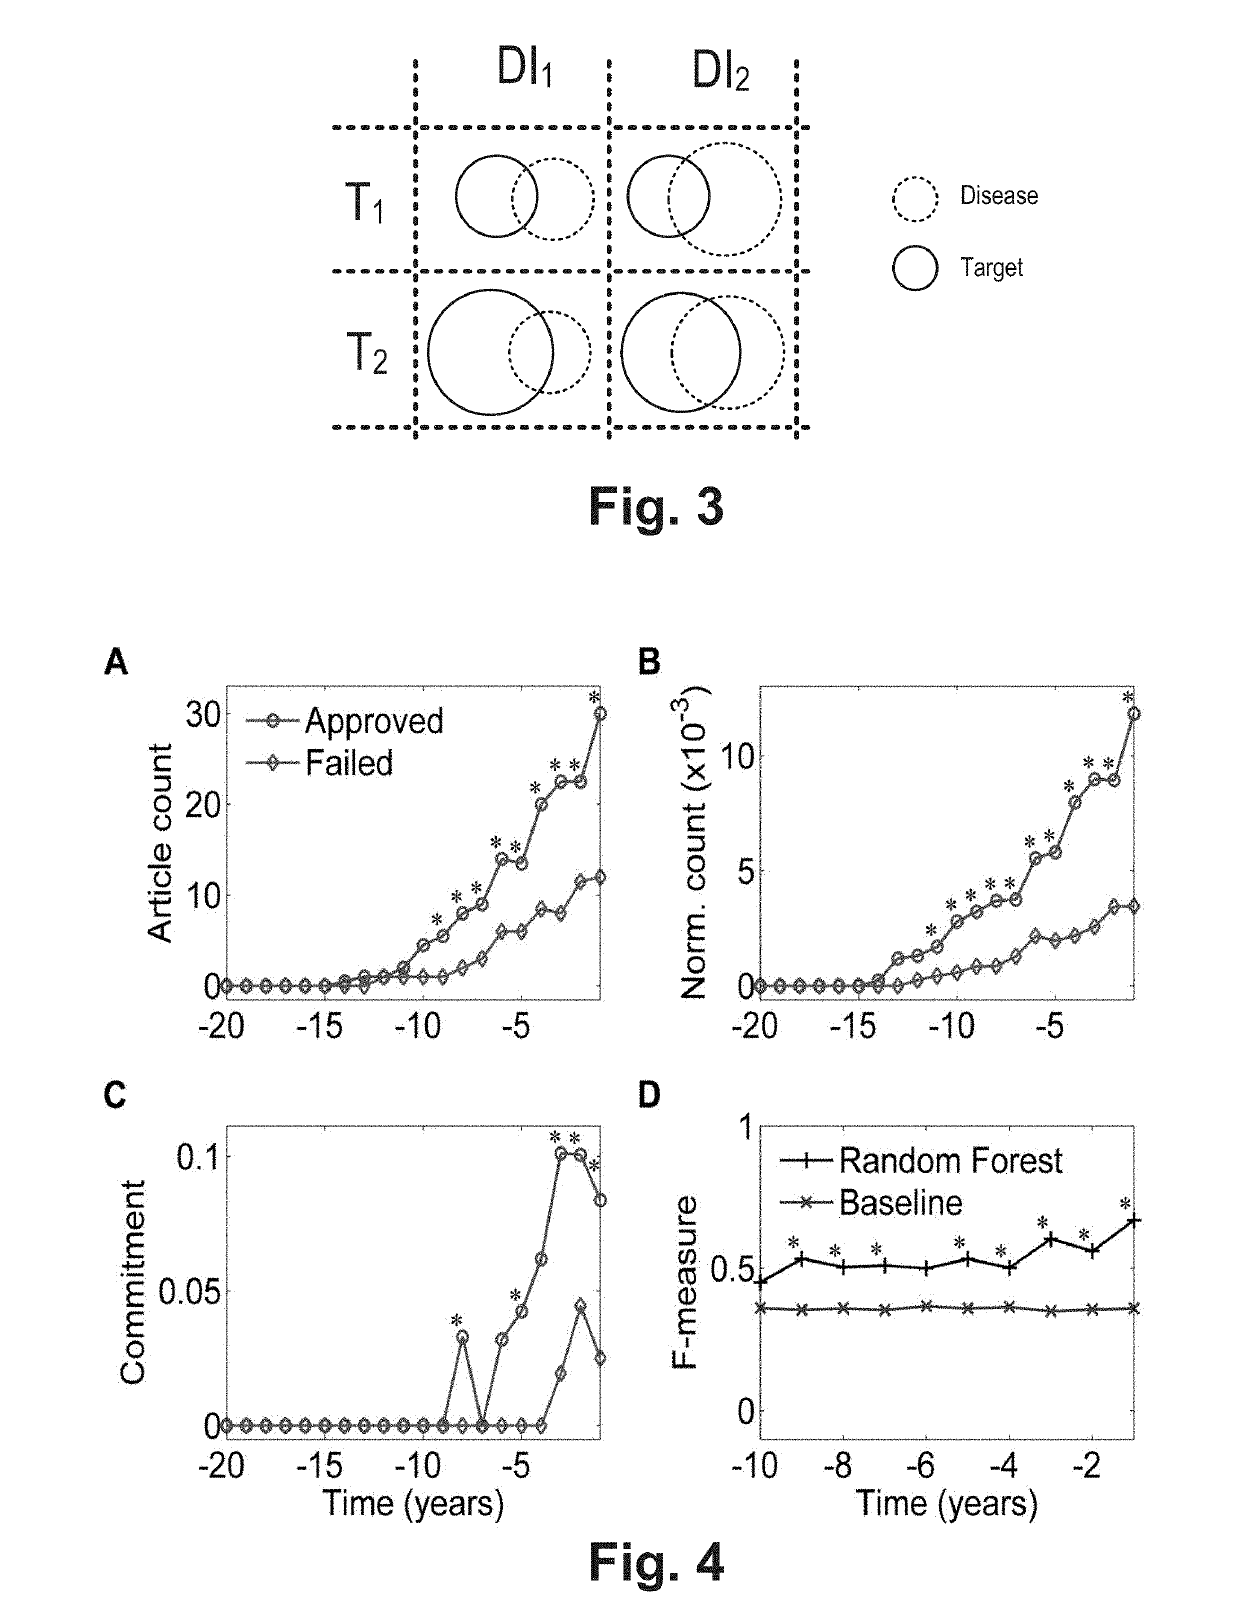 System for predicting efficacy of a target-directed drug to treat a disease